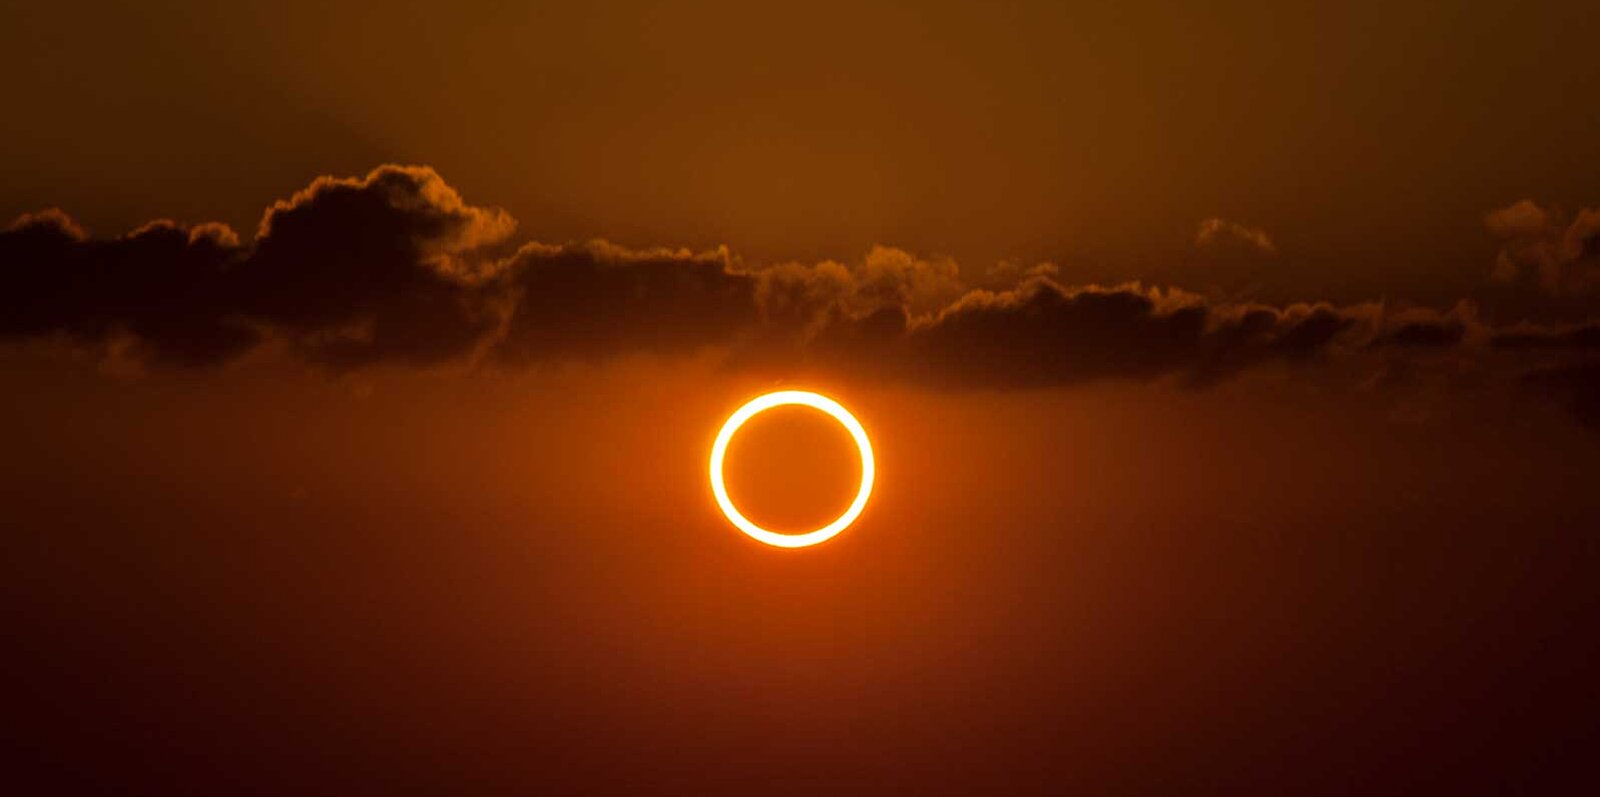 The 'Ring of fire' solar eclipse on June 10, 2021 tips and maps - Strange Sounds